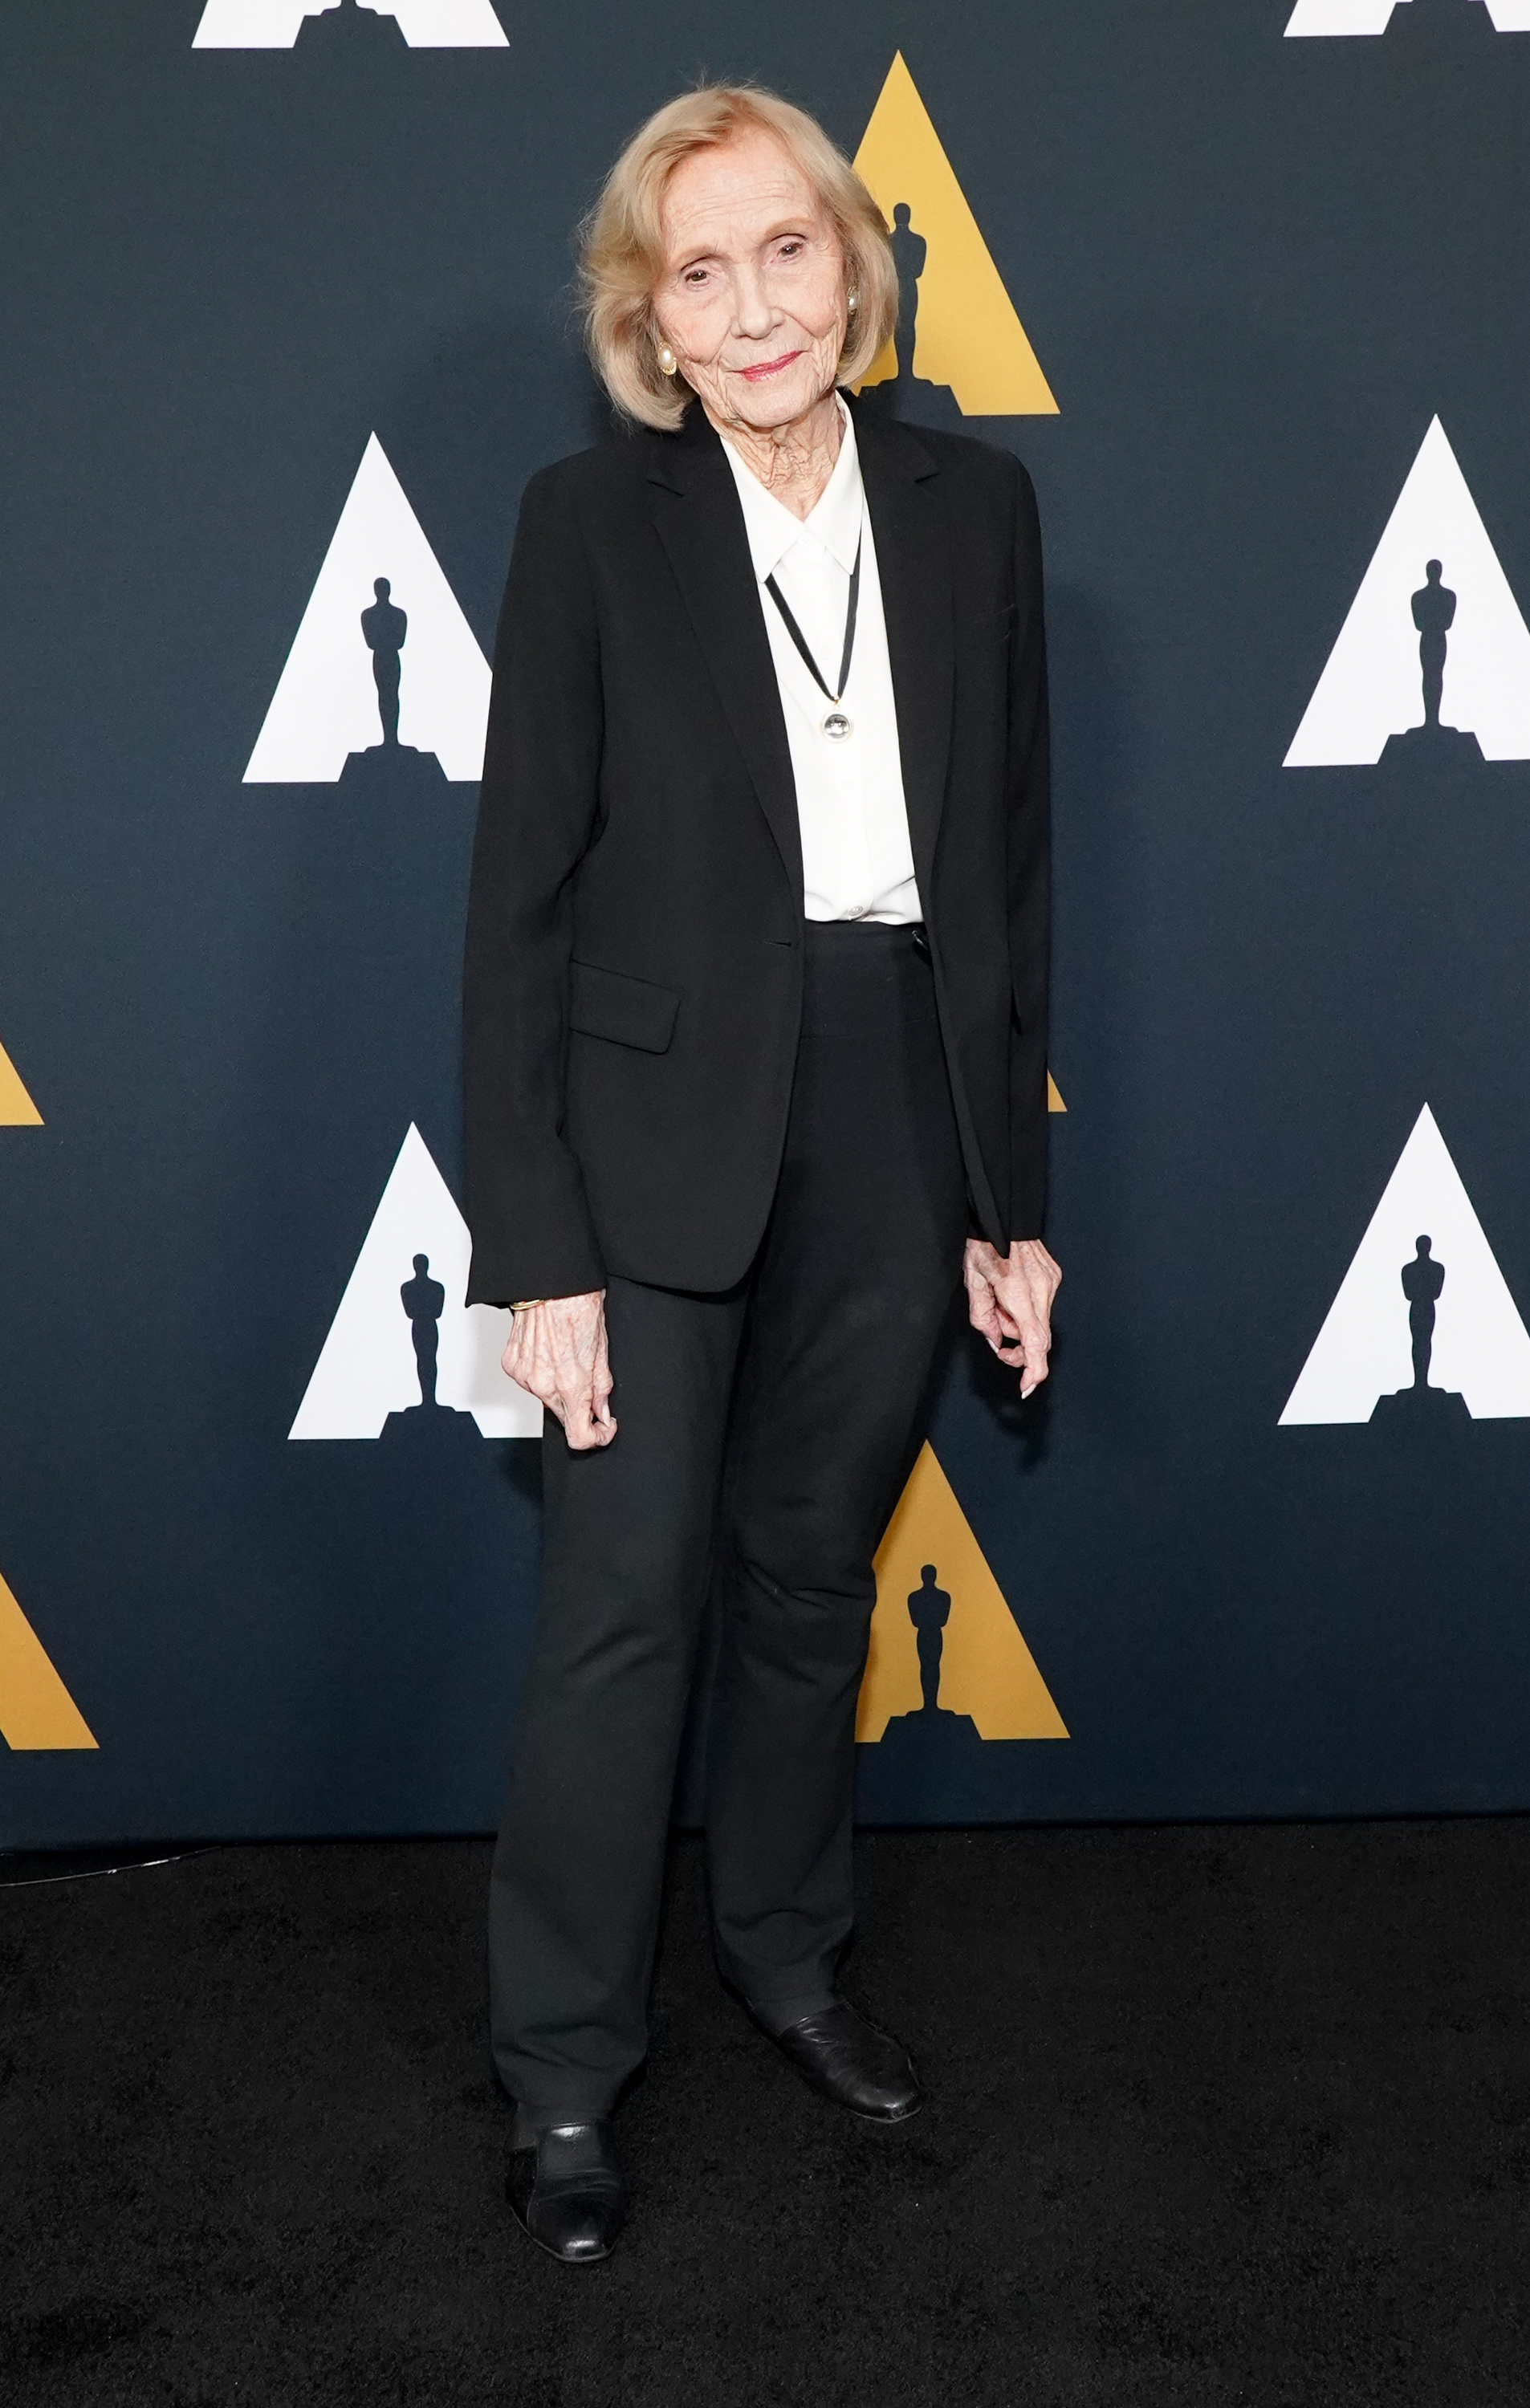 Eva Marie Saint at the Academy Nicholl Fellowships Screenwriting Awards in Beverly Hills, 2019 | Source: Getty Images